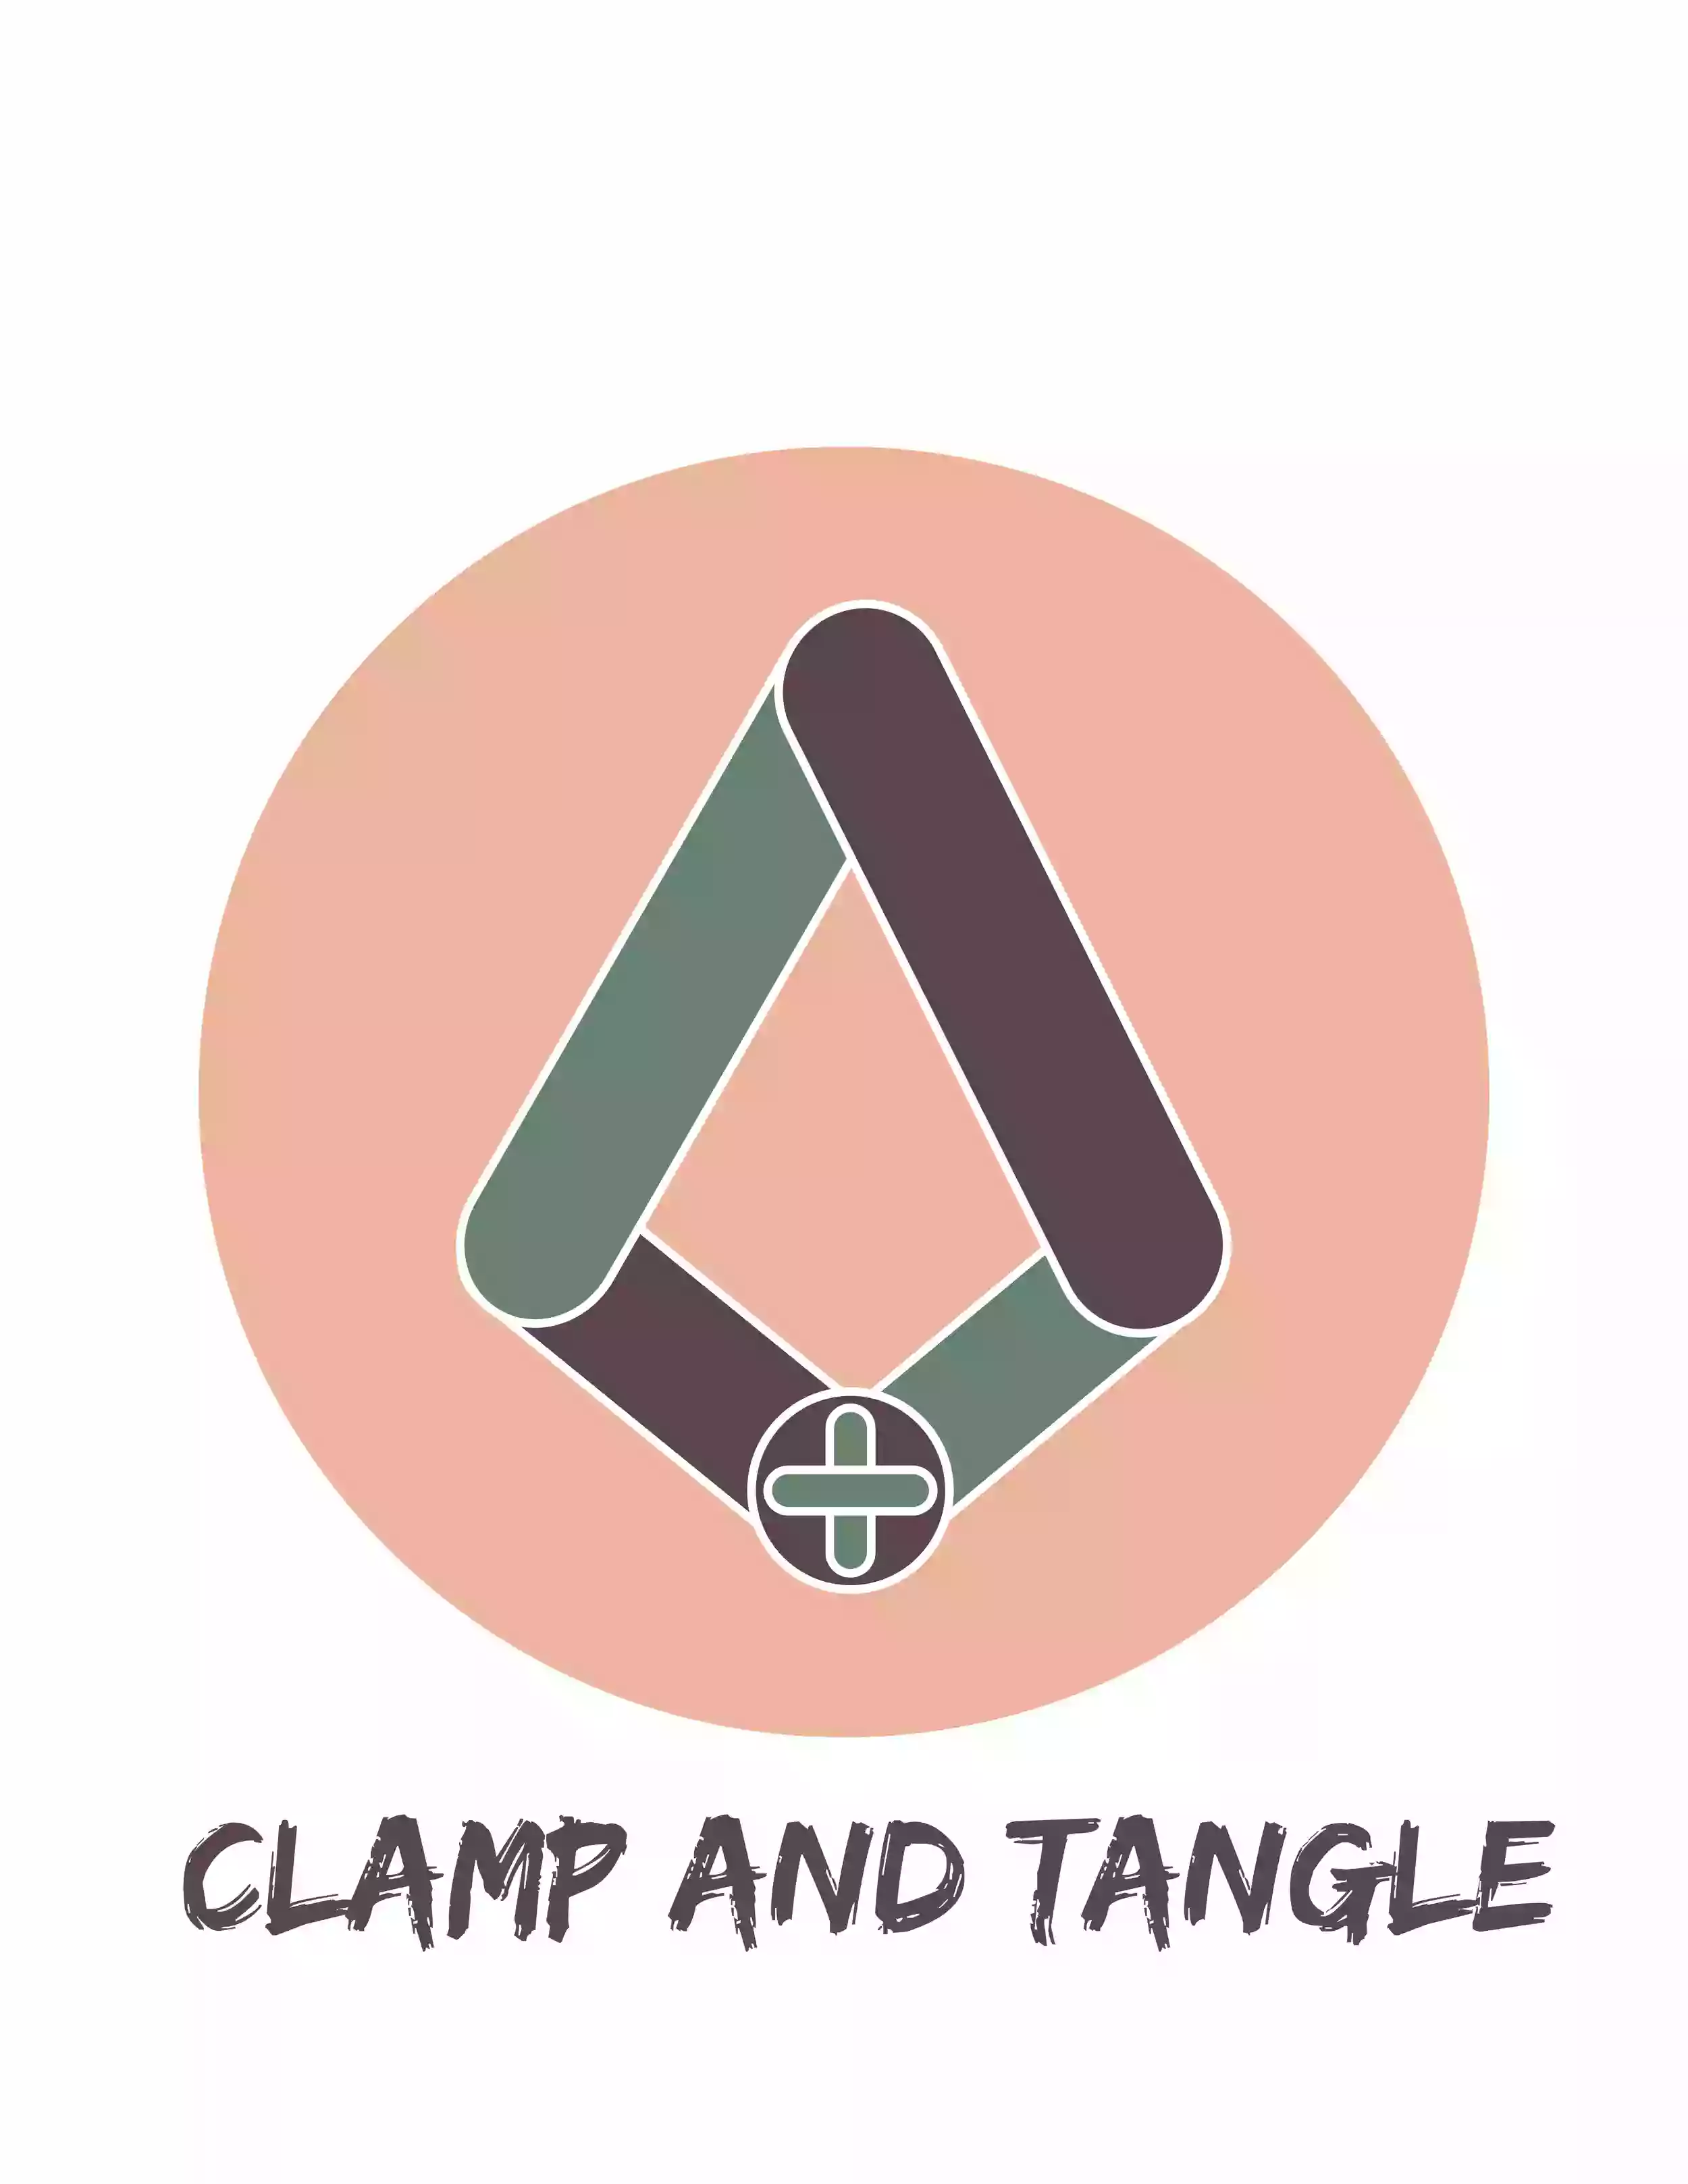 Clamp and Tangle